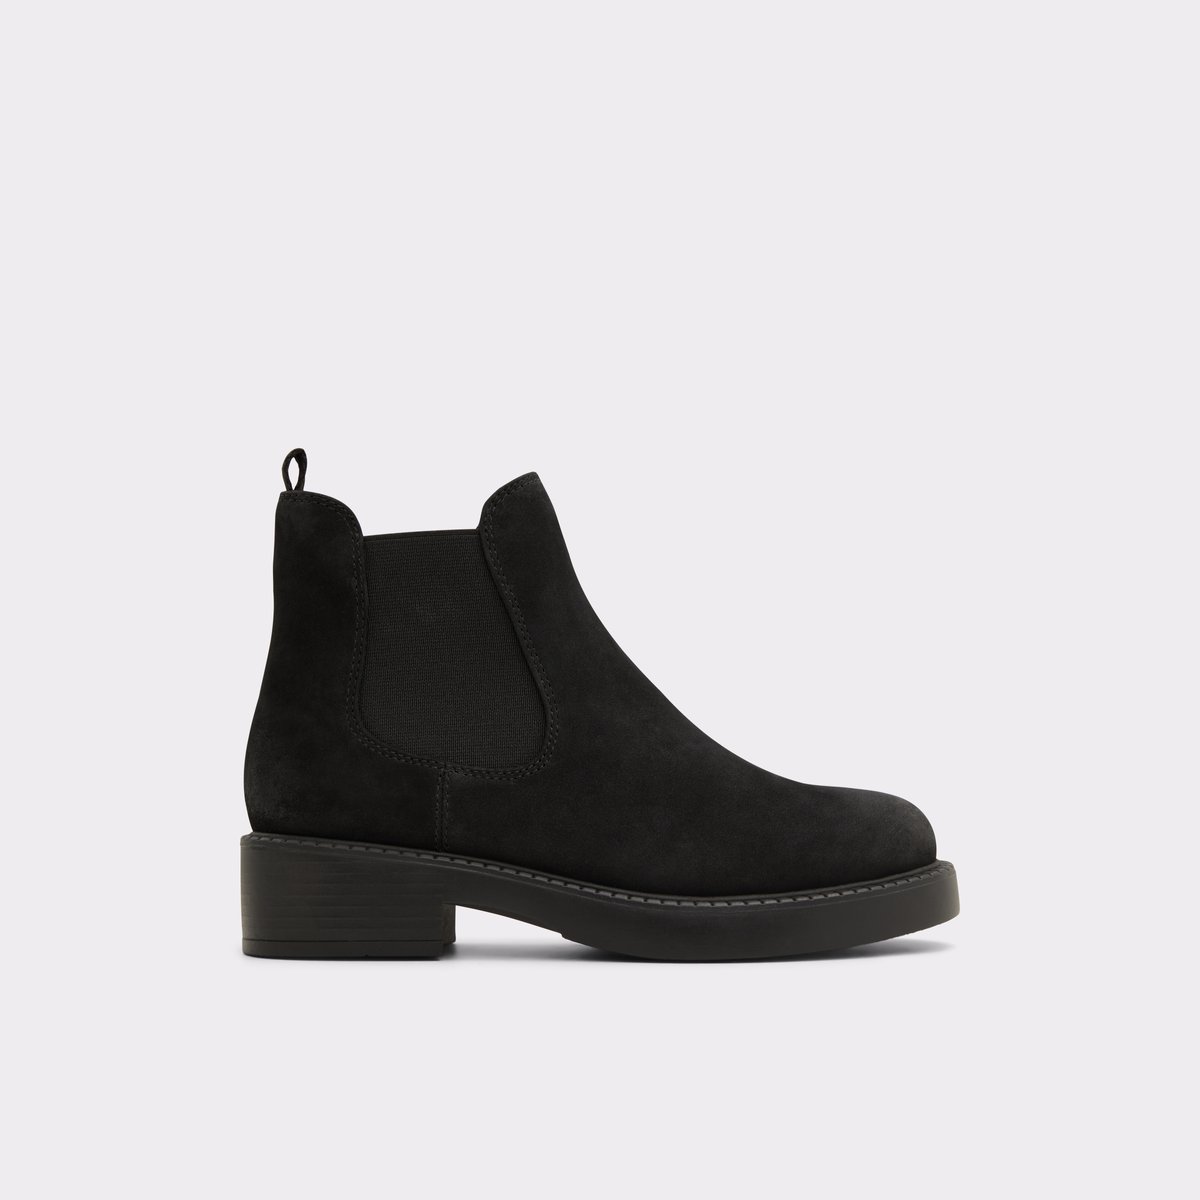 May Other Black Women's Chelsea boots | ALDO Canada